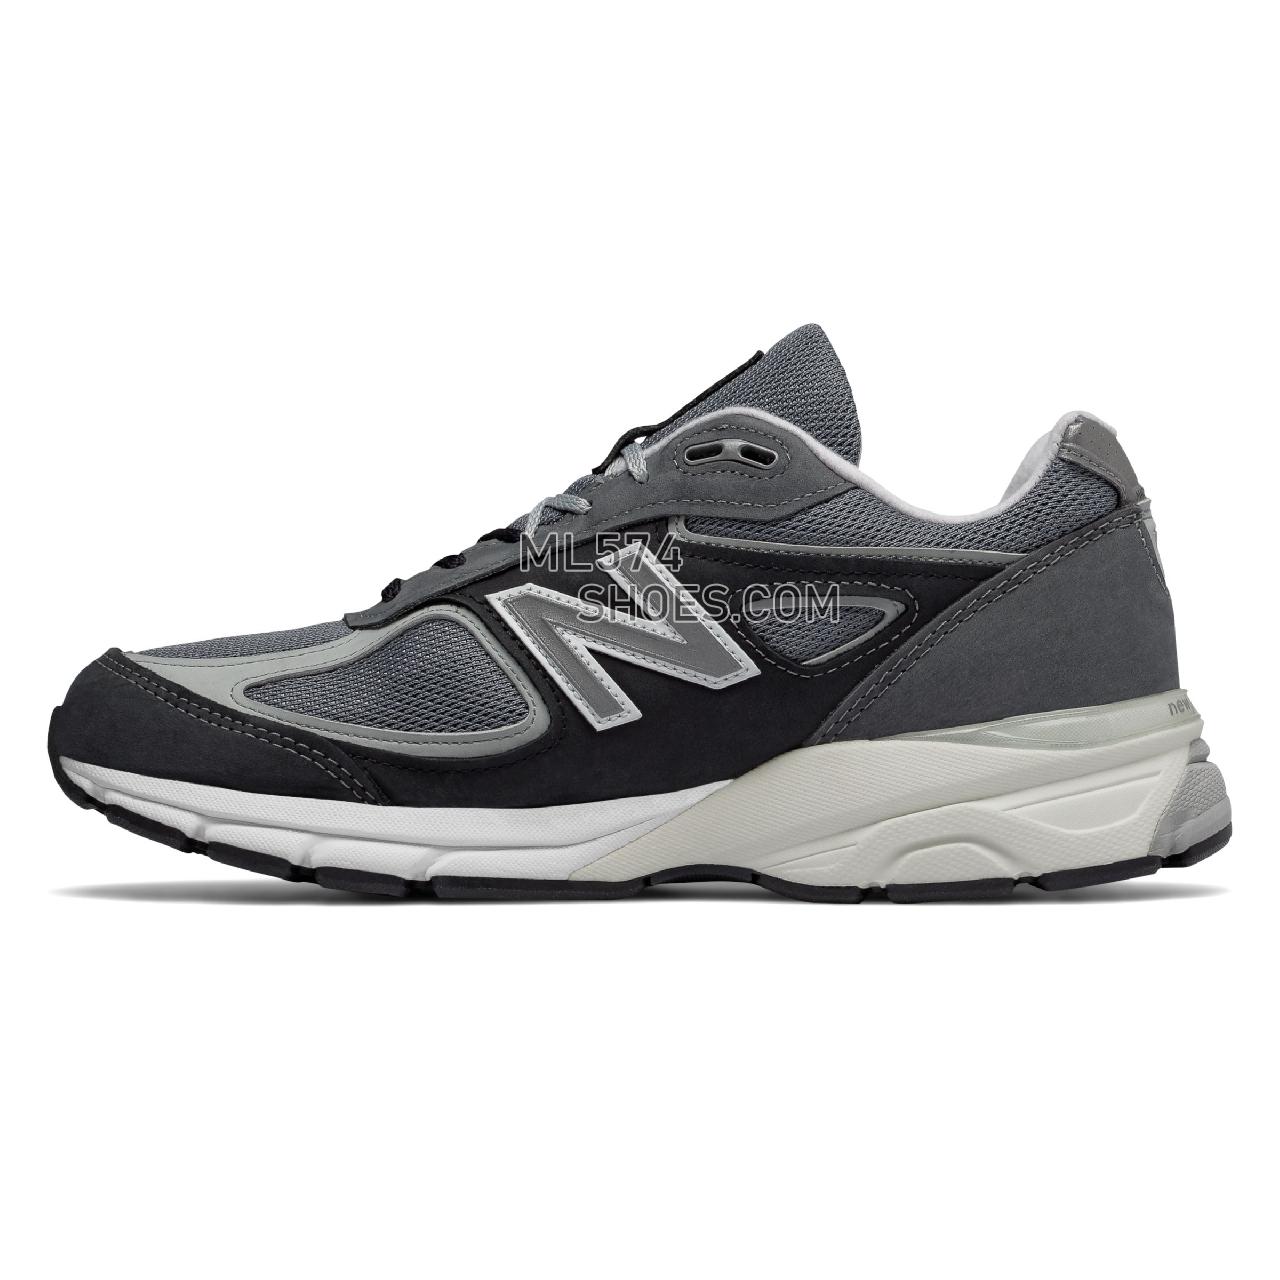 New Balance Mens 990v4 Made in US - Men's 990 - Running Magnet with Silver Mink - M990XG4